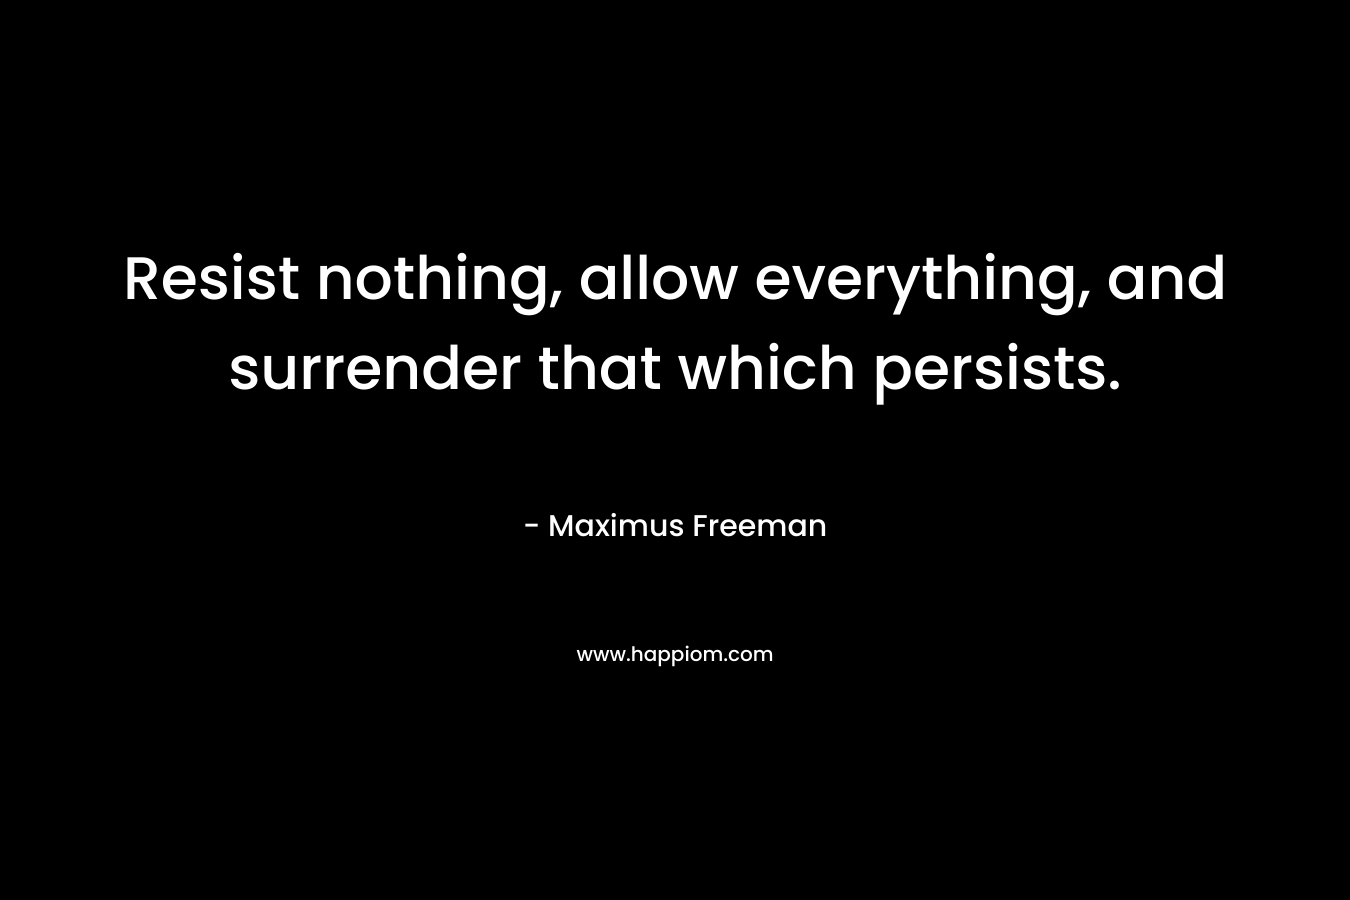 Resist nothing, allow everything, and surrender that which persists. – Maximus Freeman